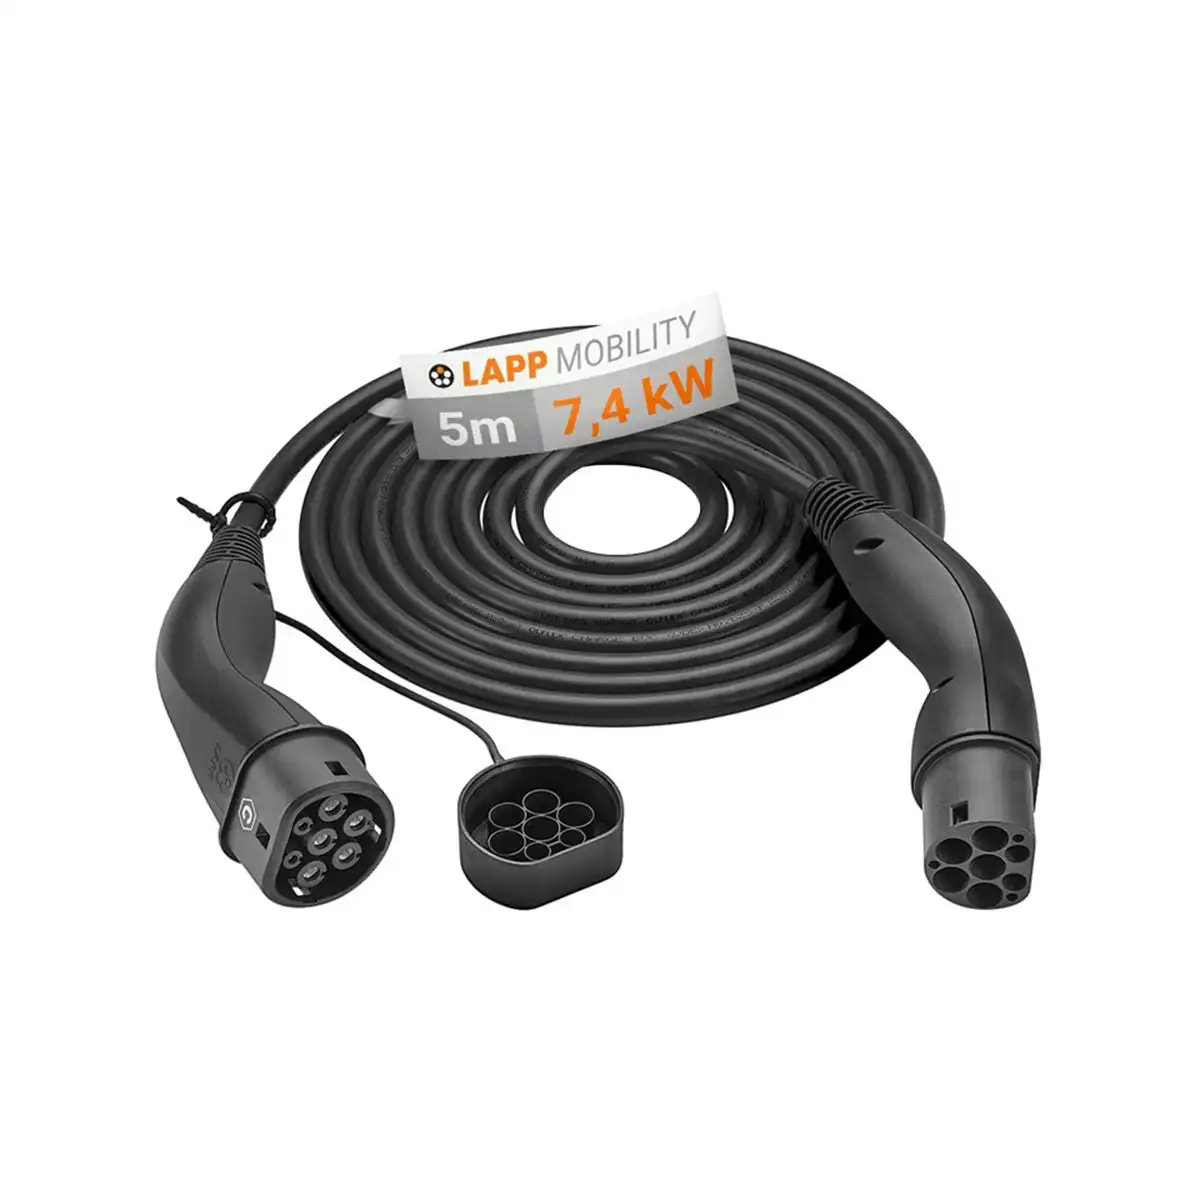 LAPP EV Helix Charge Cable Type 2 (7.4kW-1P-32A) 5m for Hybrid and Electric Cars - Black